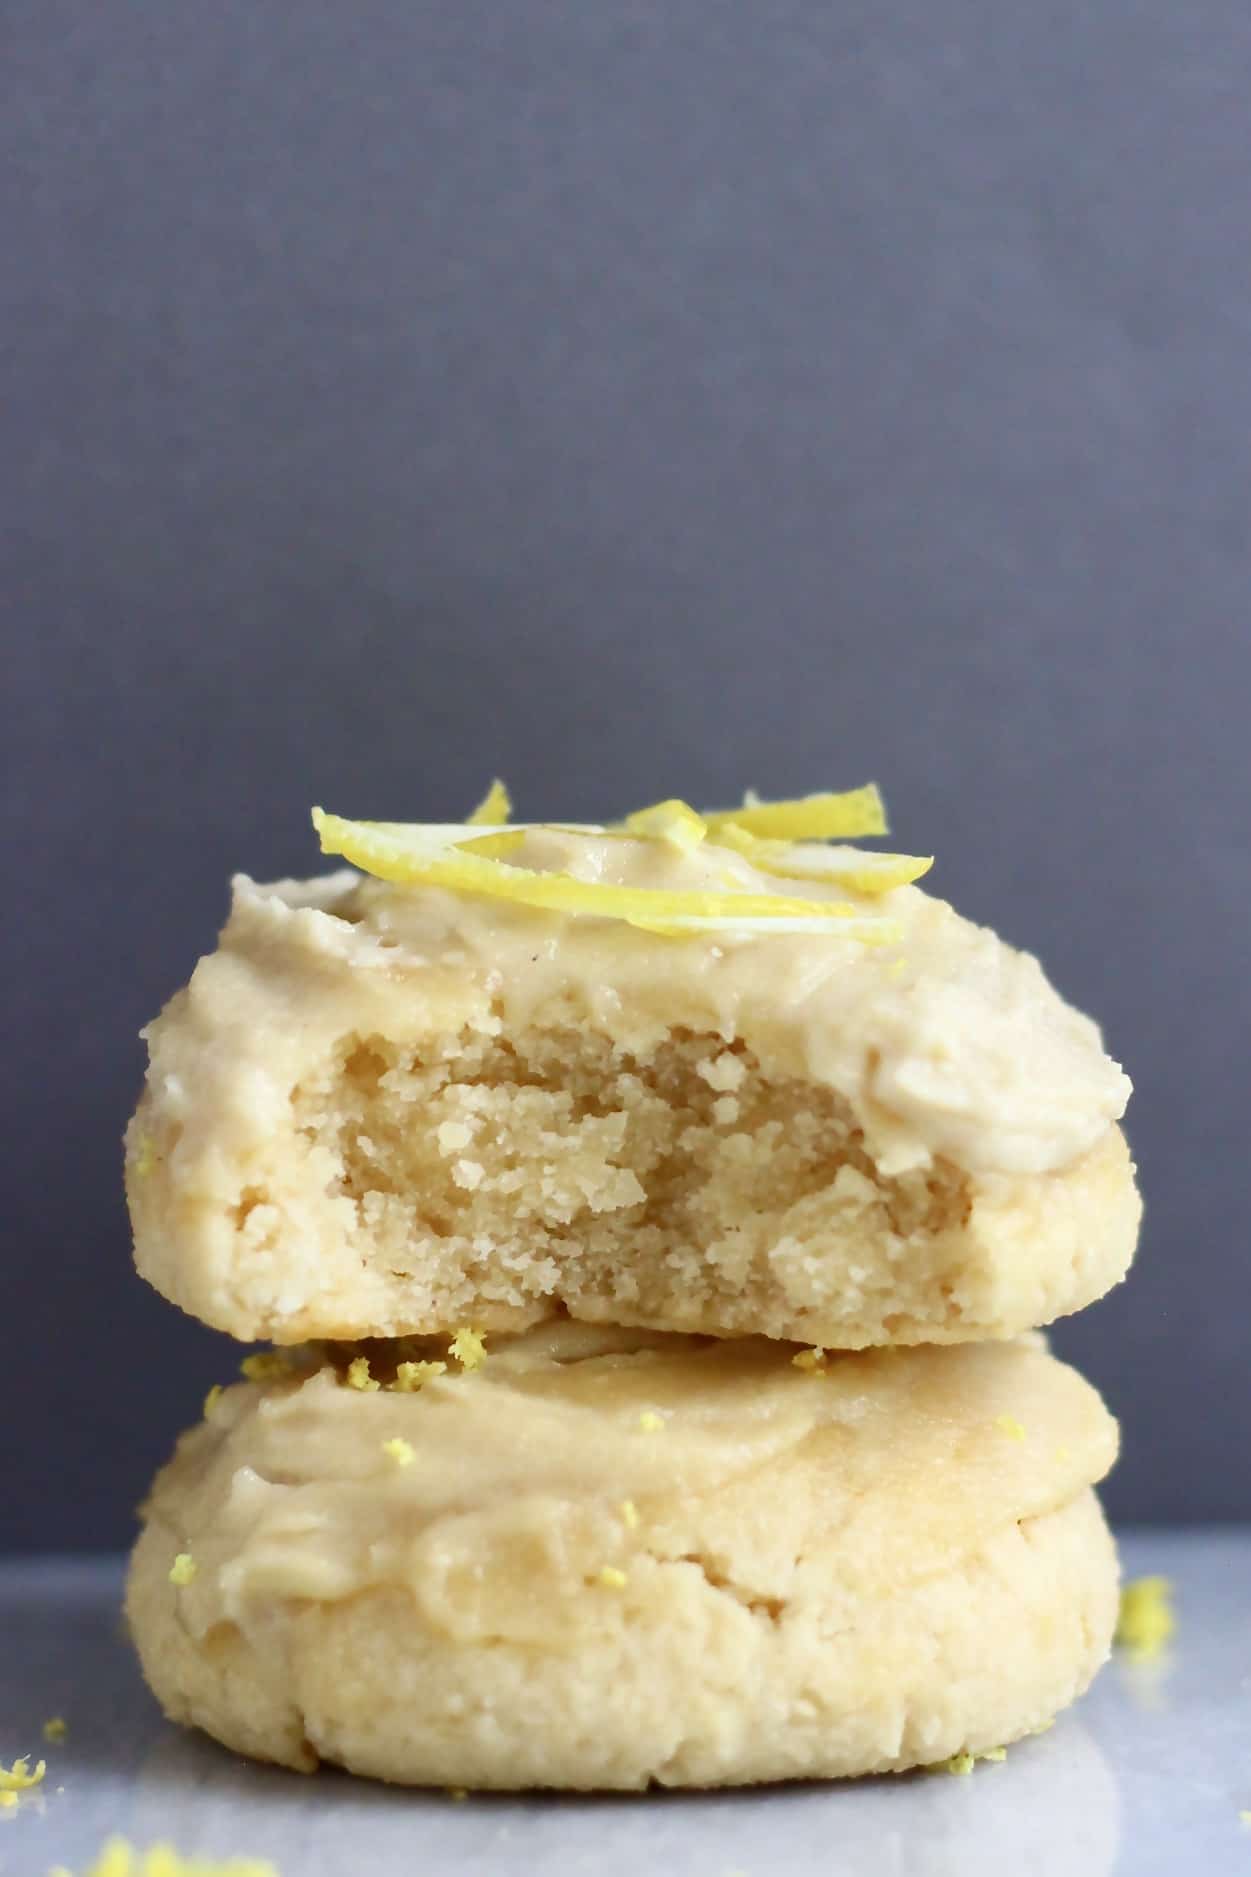 Two frosted gluten-free vegan lemon cookies, one with a bite taken out of it